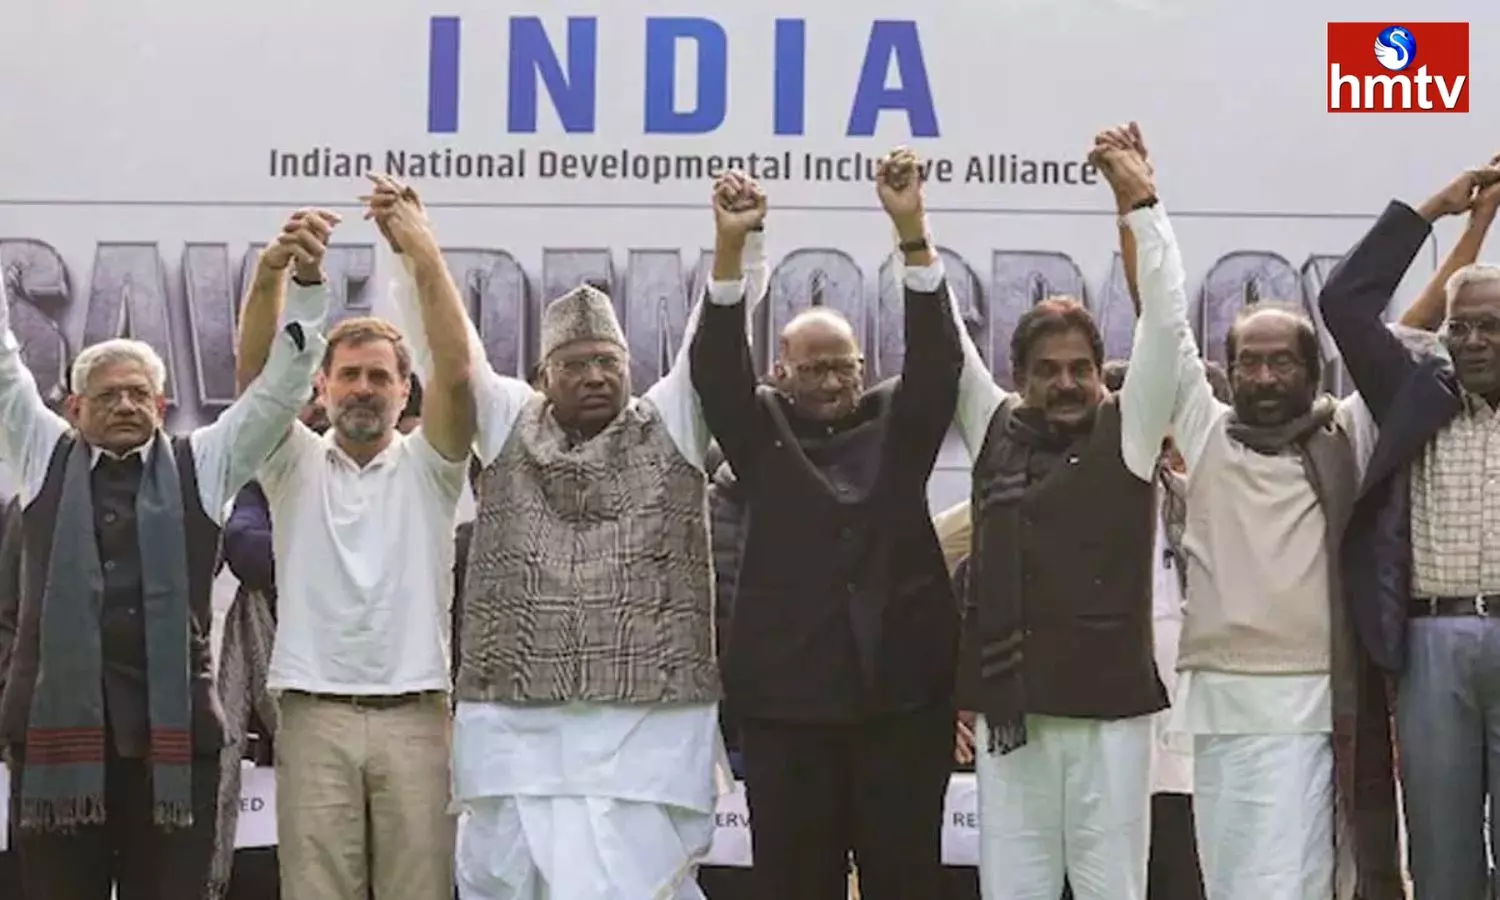 India Alliance has a Huge Rally in Delhi Today